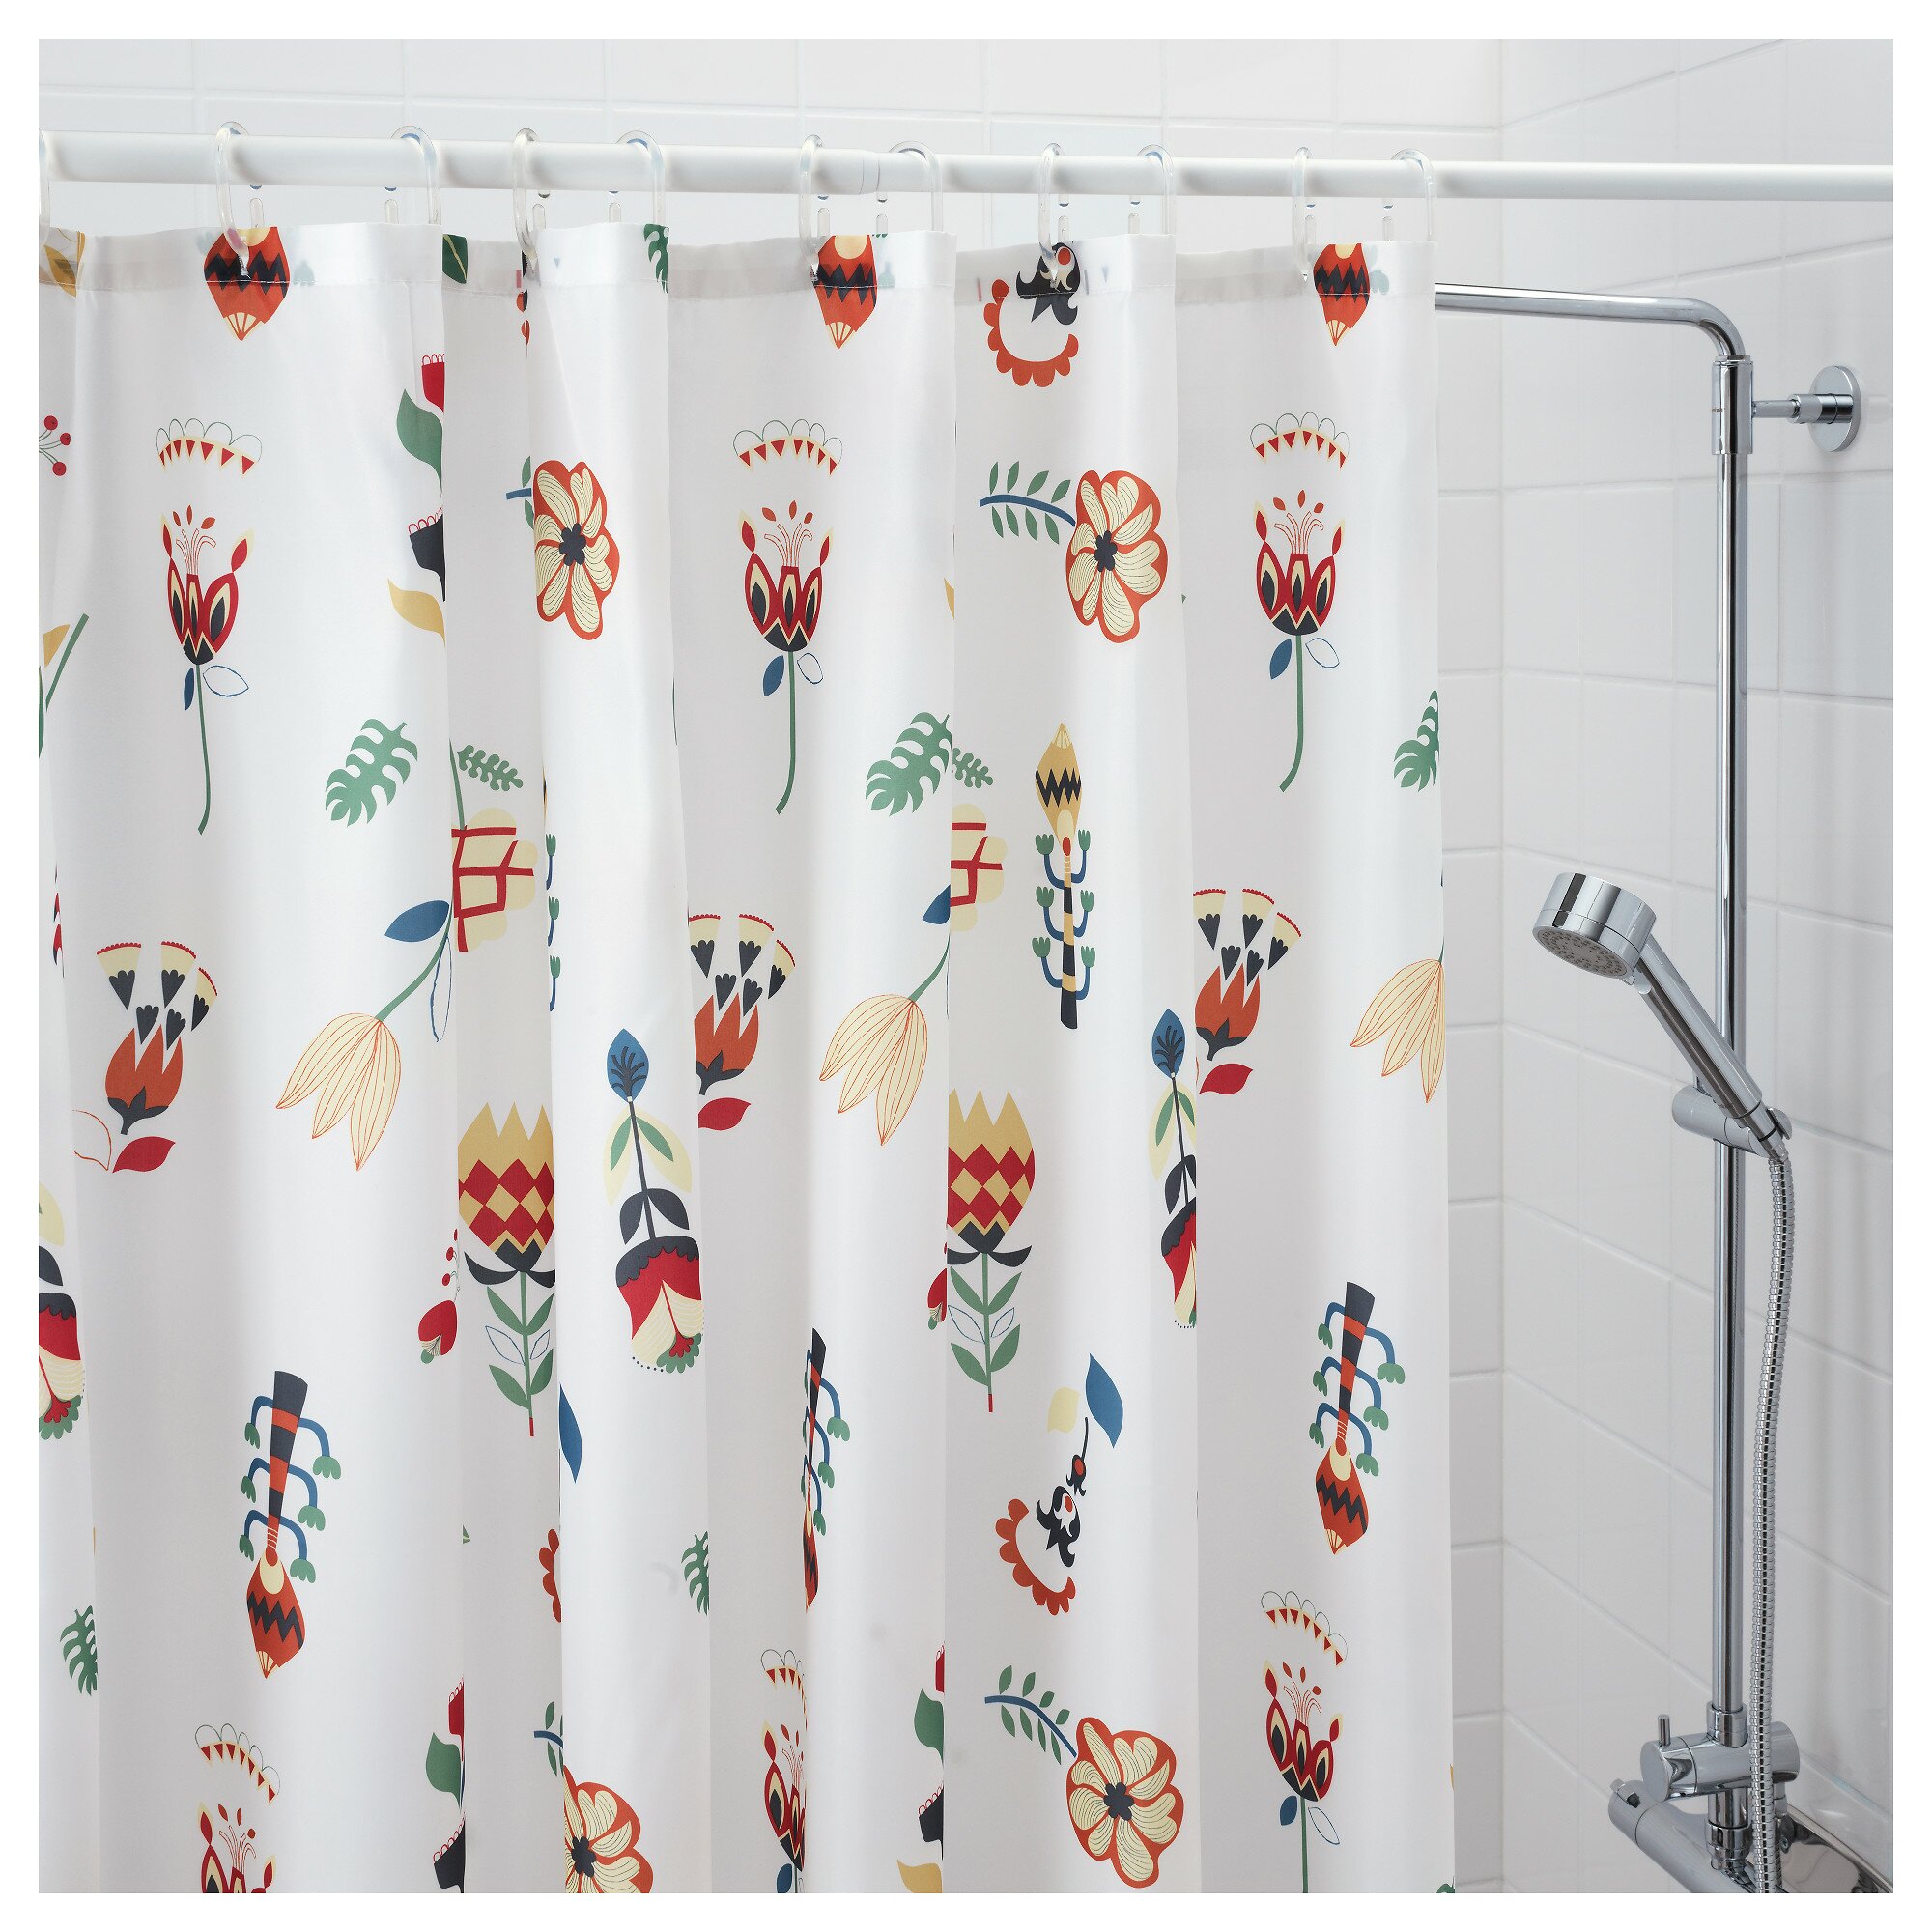 Ikea Shower Curtain for Best Your Bathroom Decoration: Cheap Shower Curtains | Ikea Shower Curtain | Cloth Shower Curtains